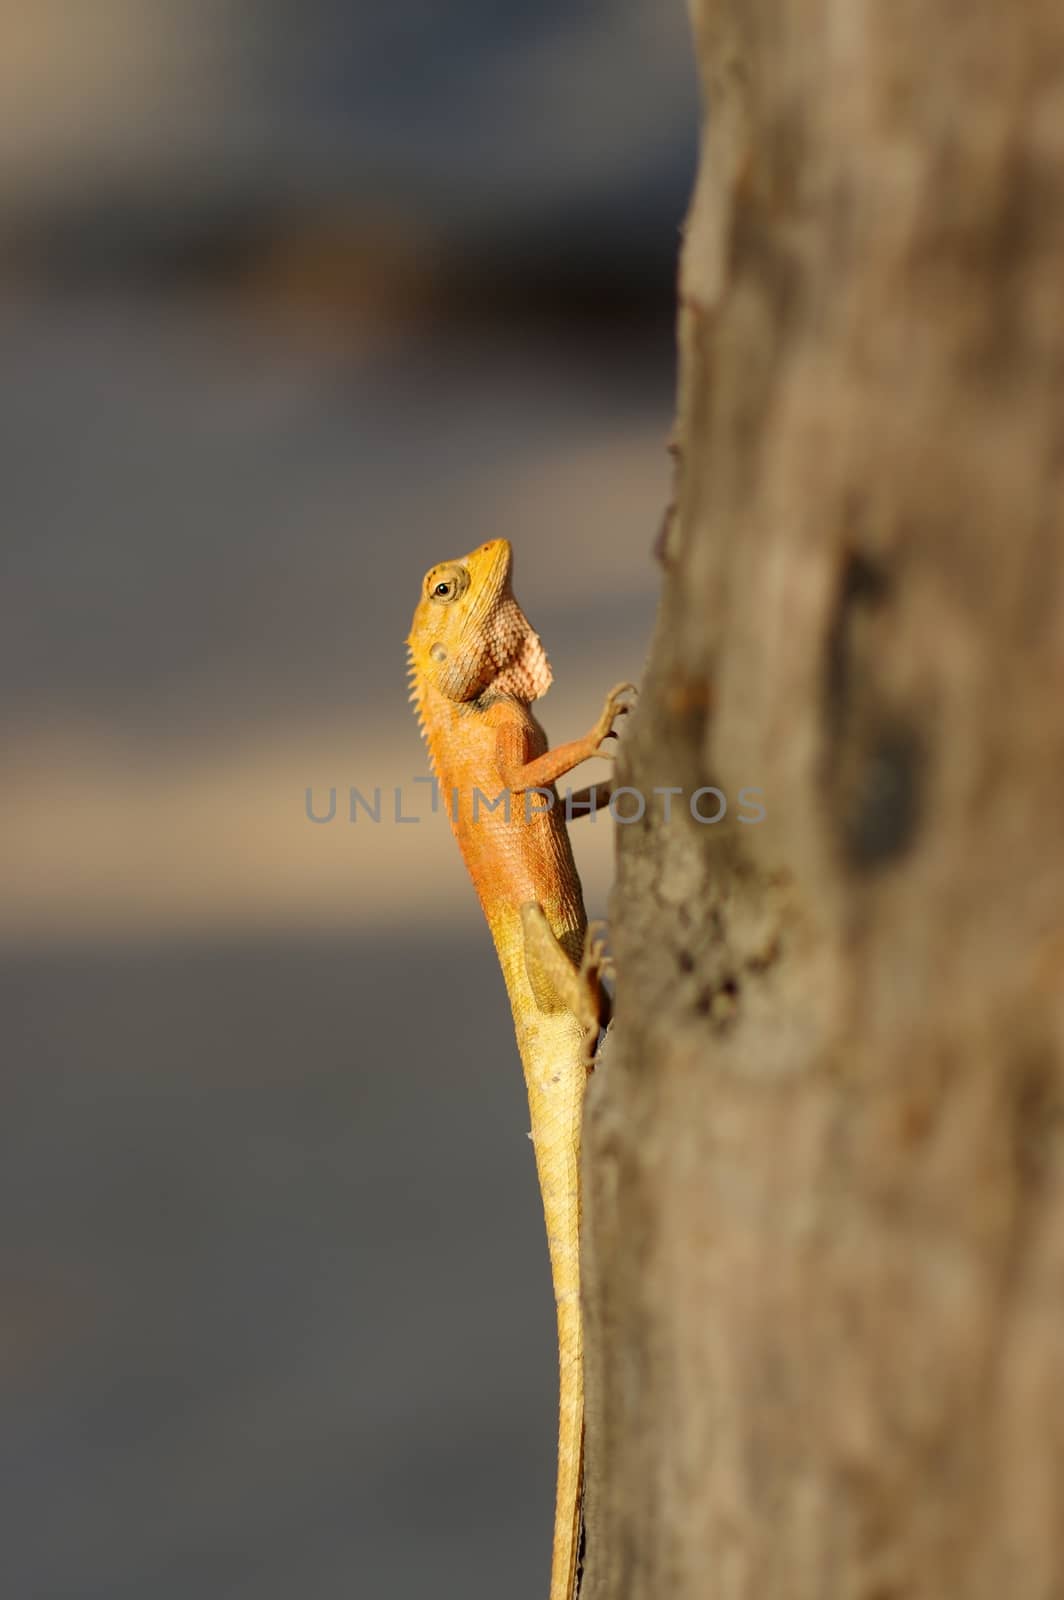 a bight yellow asia garden lizard Calotes versicolour Crested Tree Lizard with blue background on a tree in with plam leave, close-up shooting n Thailand by evolutionnow